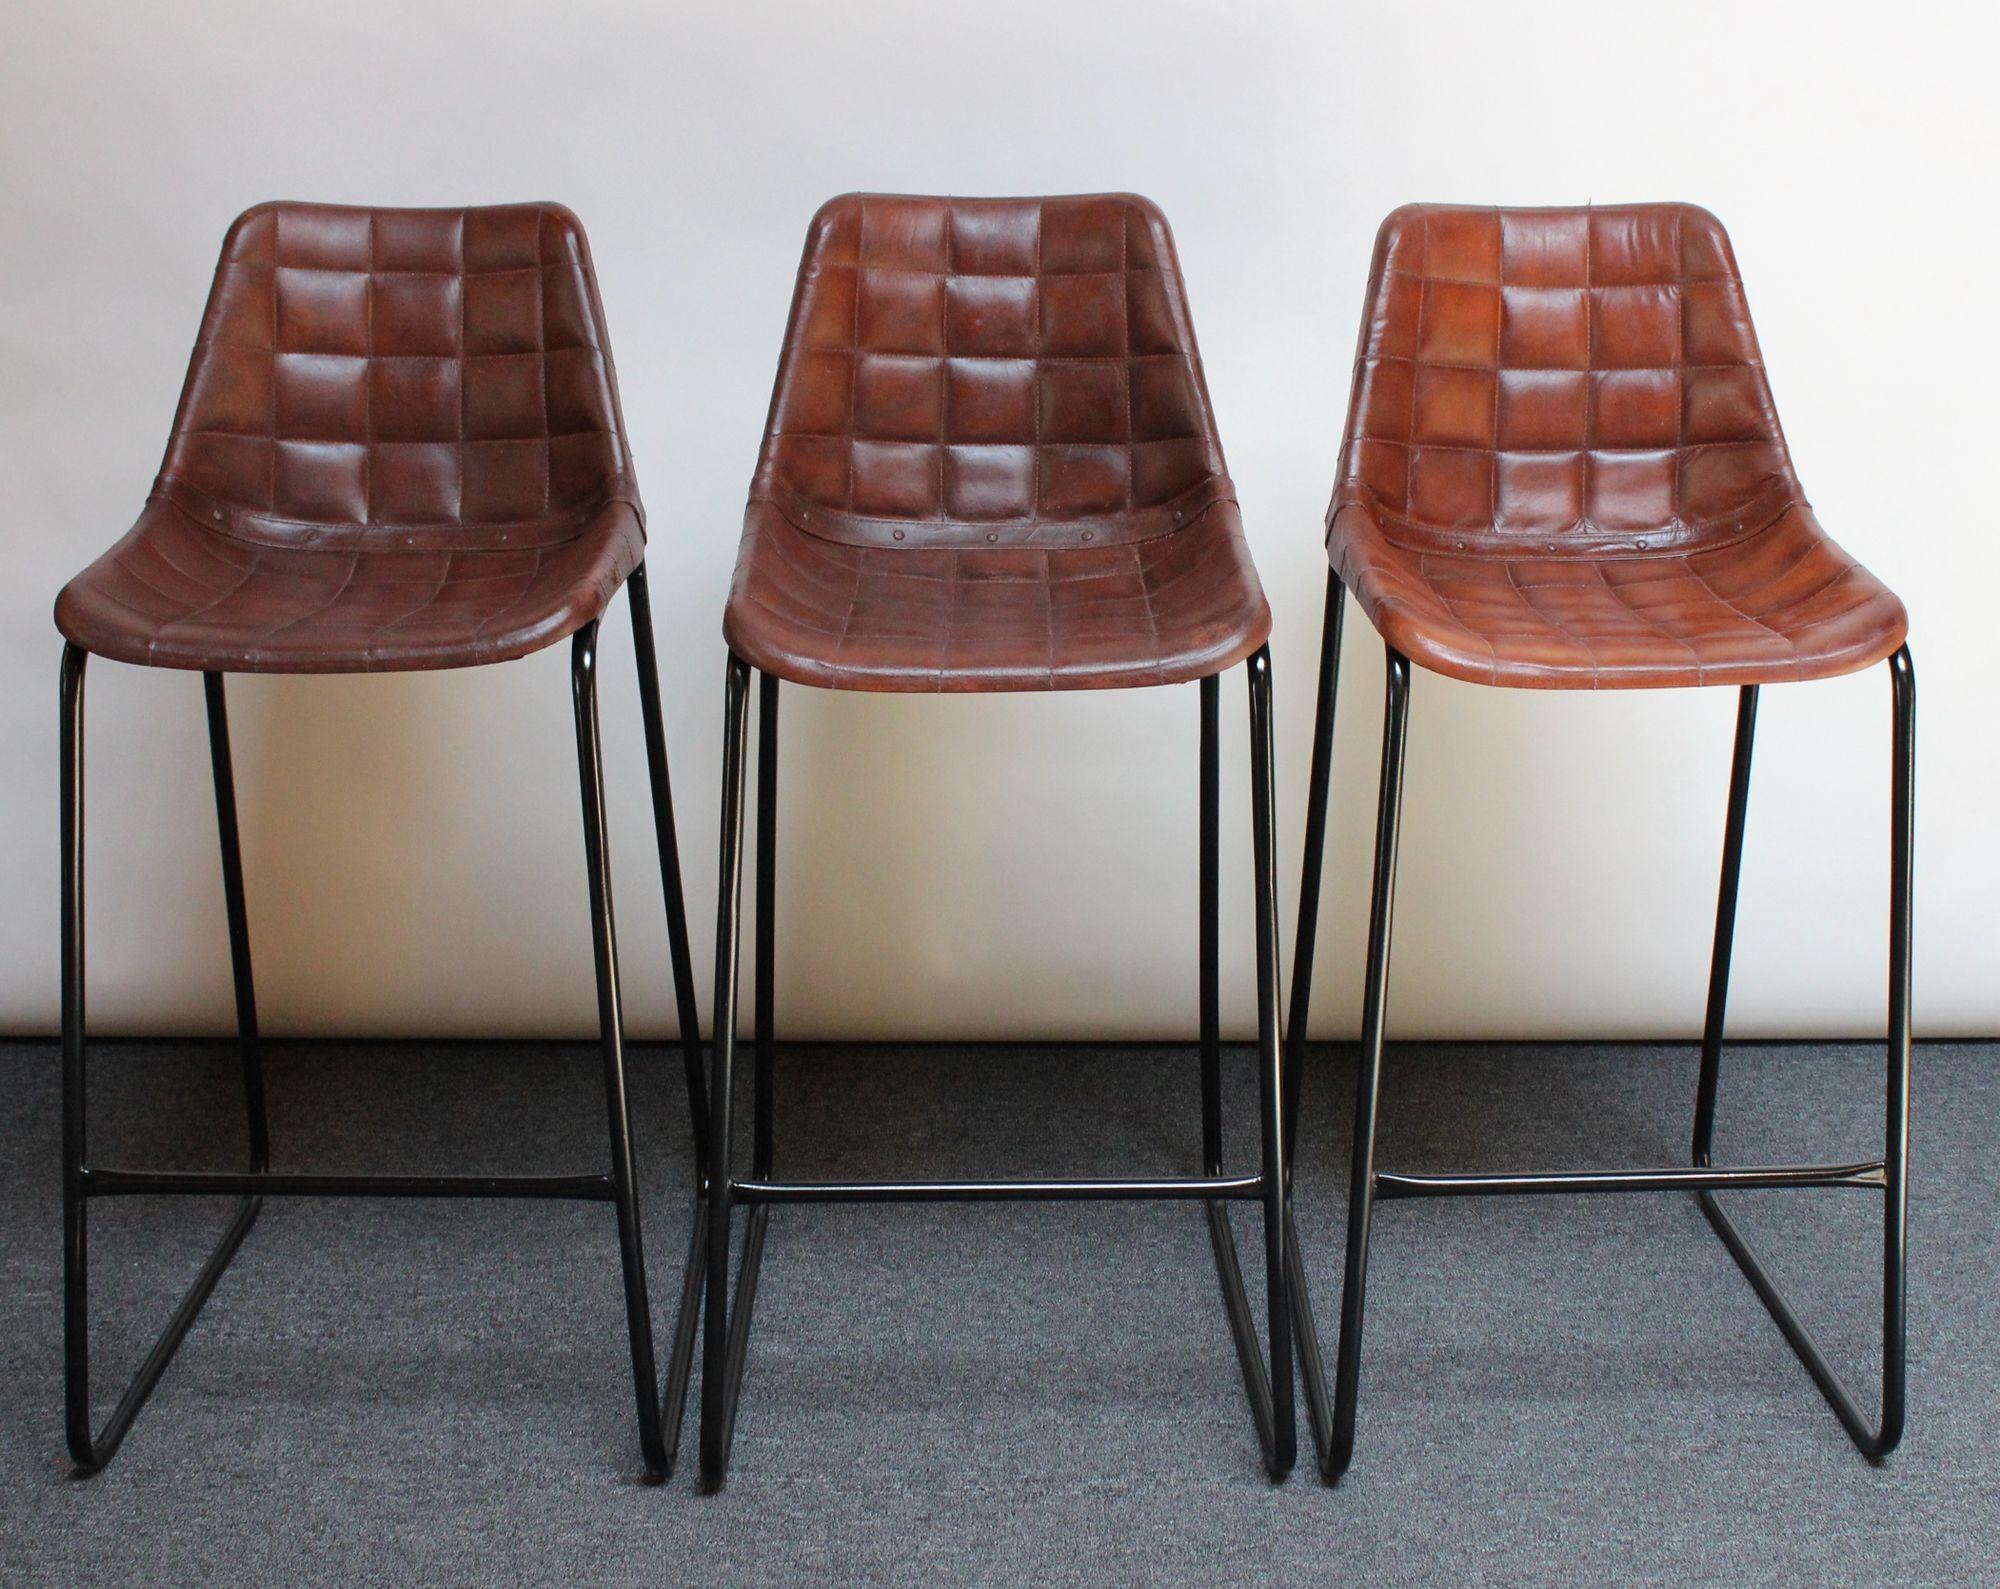 Painted Set of Three Vintage Italian Steel and Iron Barstools with Leatherette Seats For Sale